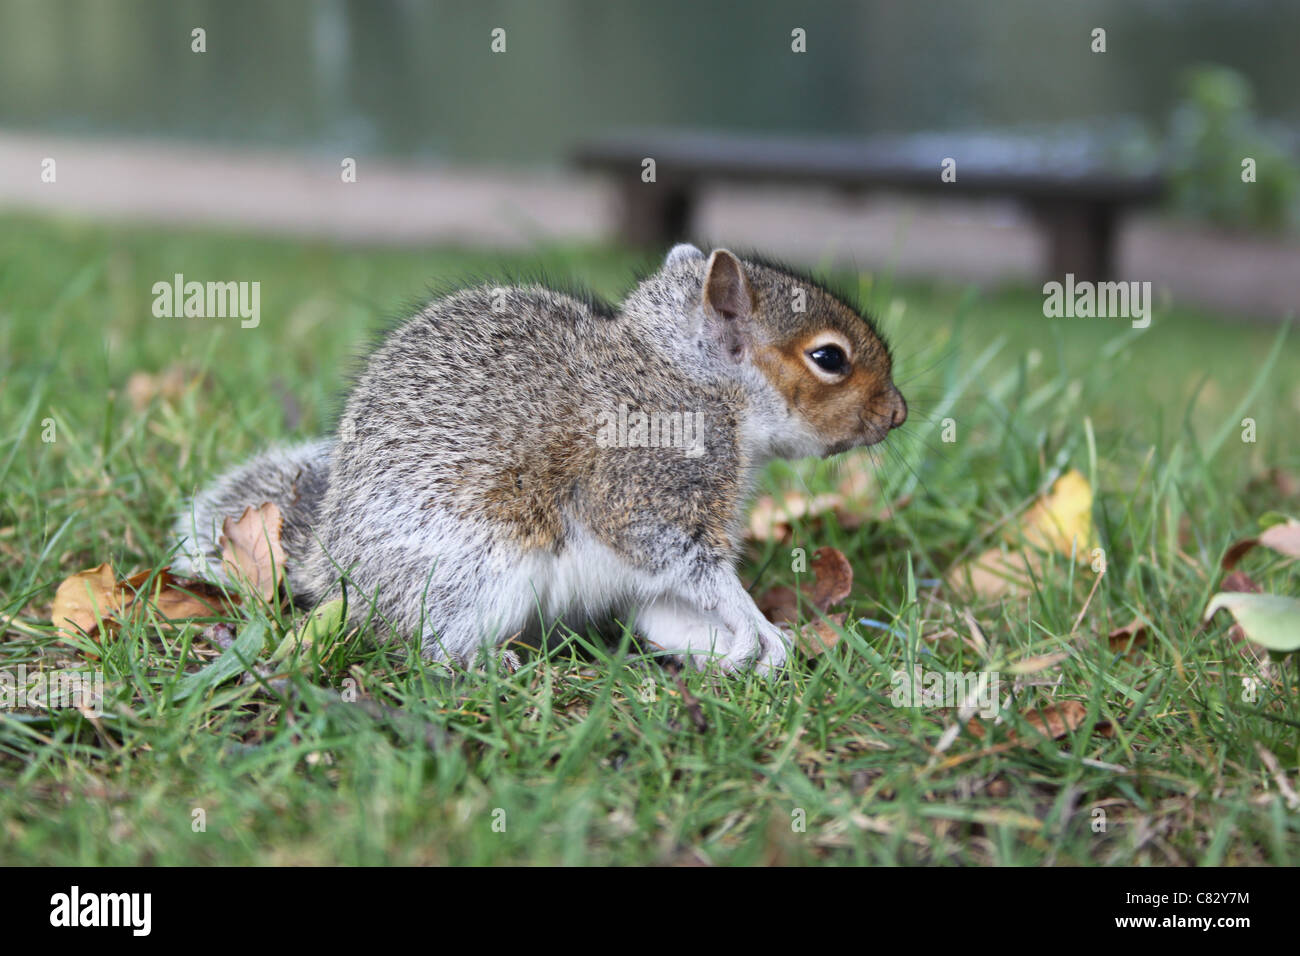 A baby squirrel in Roundhay Park, Leeds Stock Photo